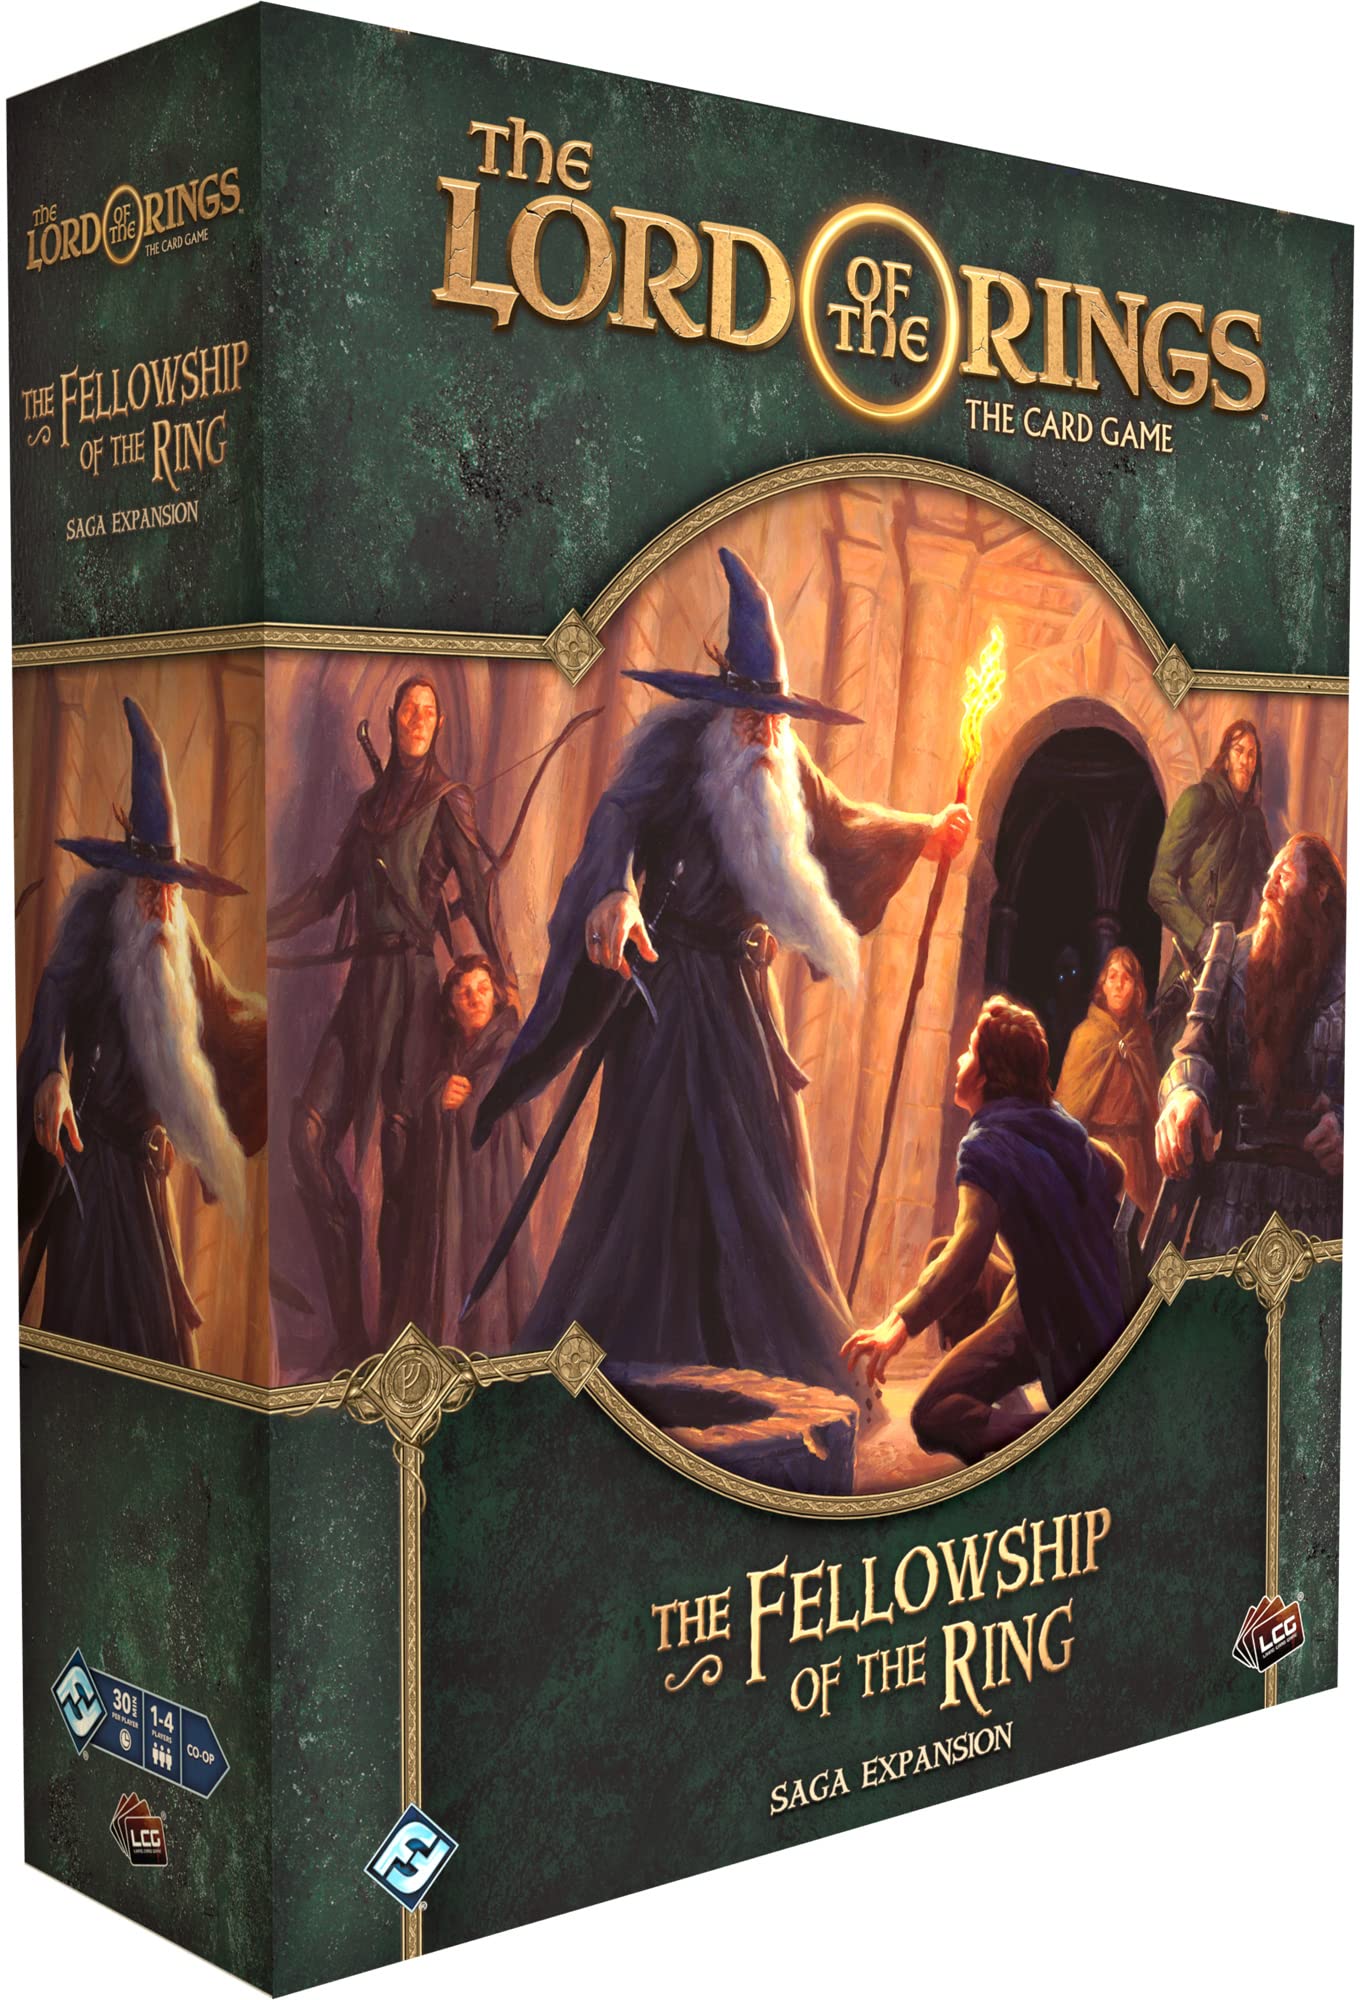 $50.78: The Lord of the Rings The Card Game The Fellowship of the Ring SAGA EXPANSION